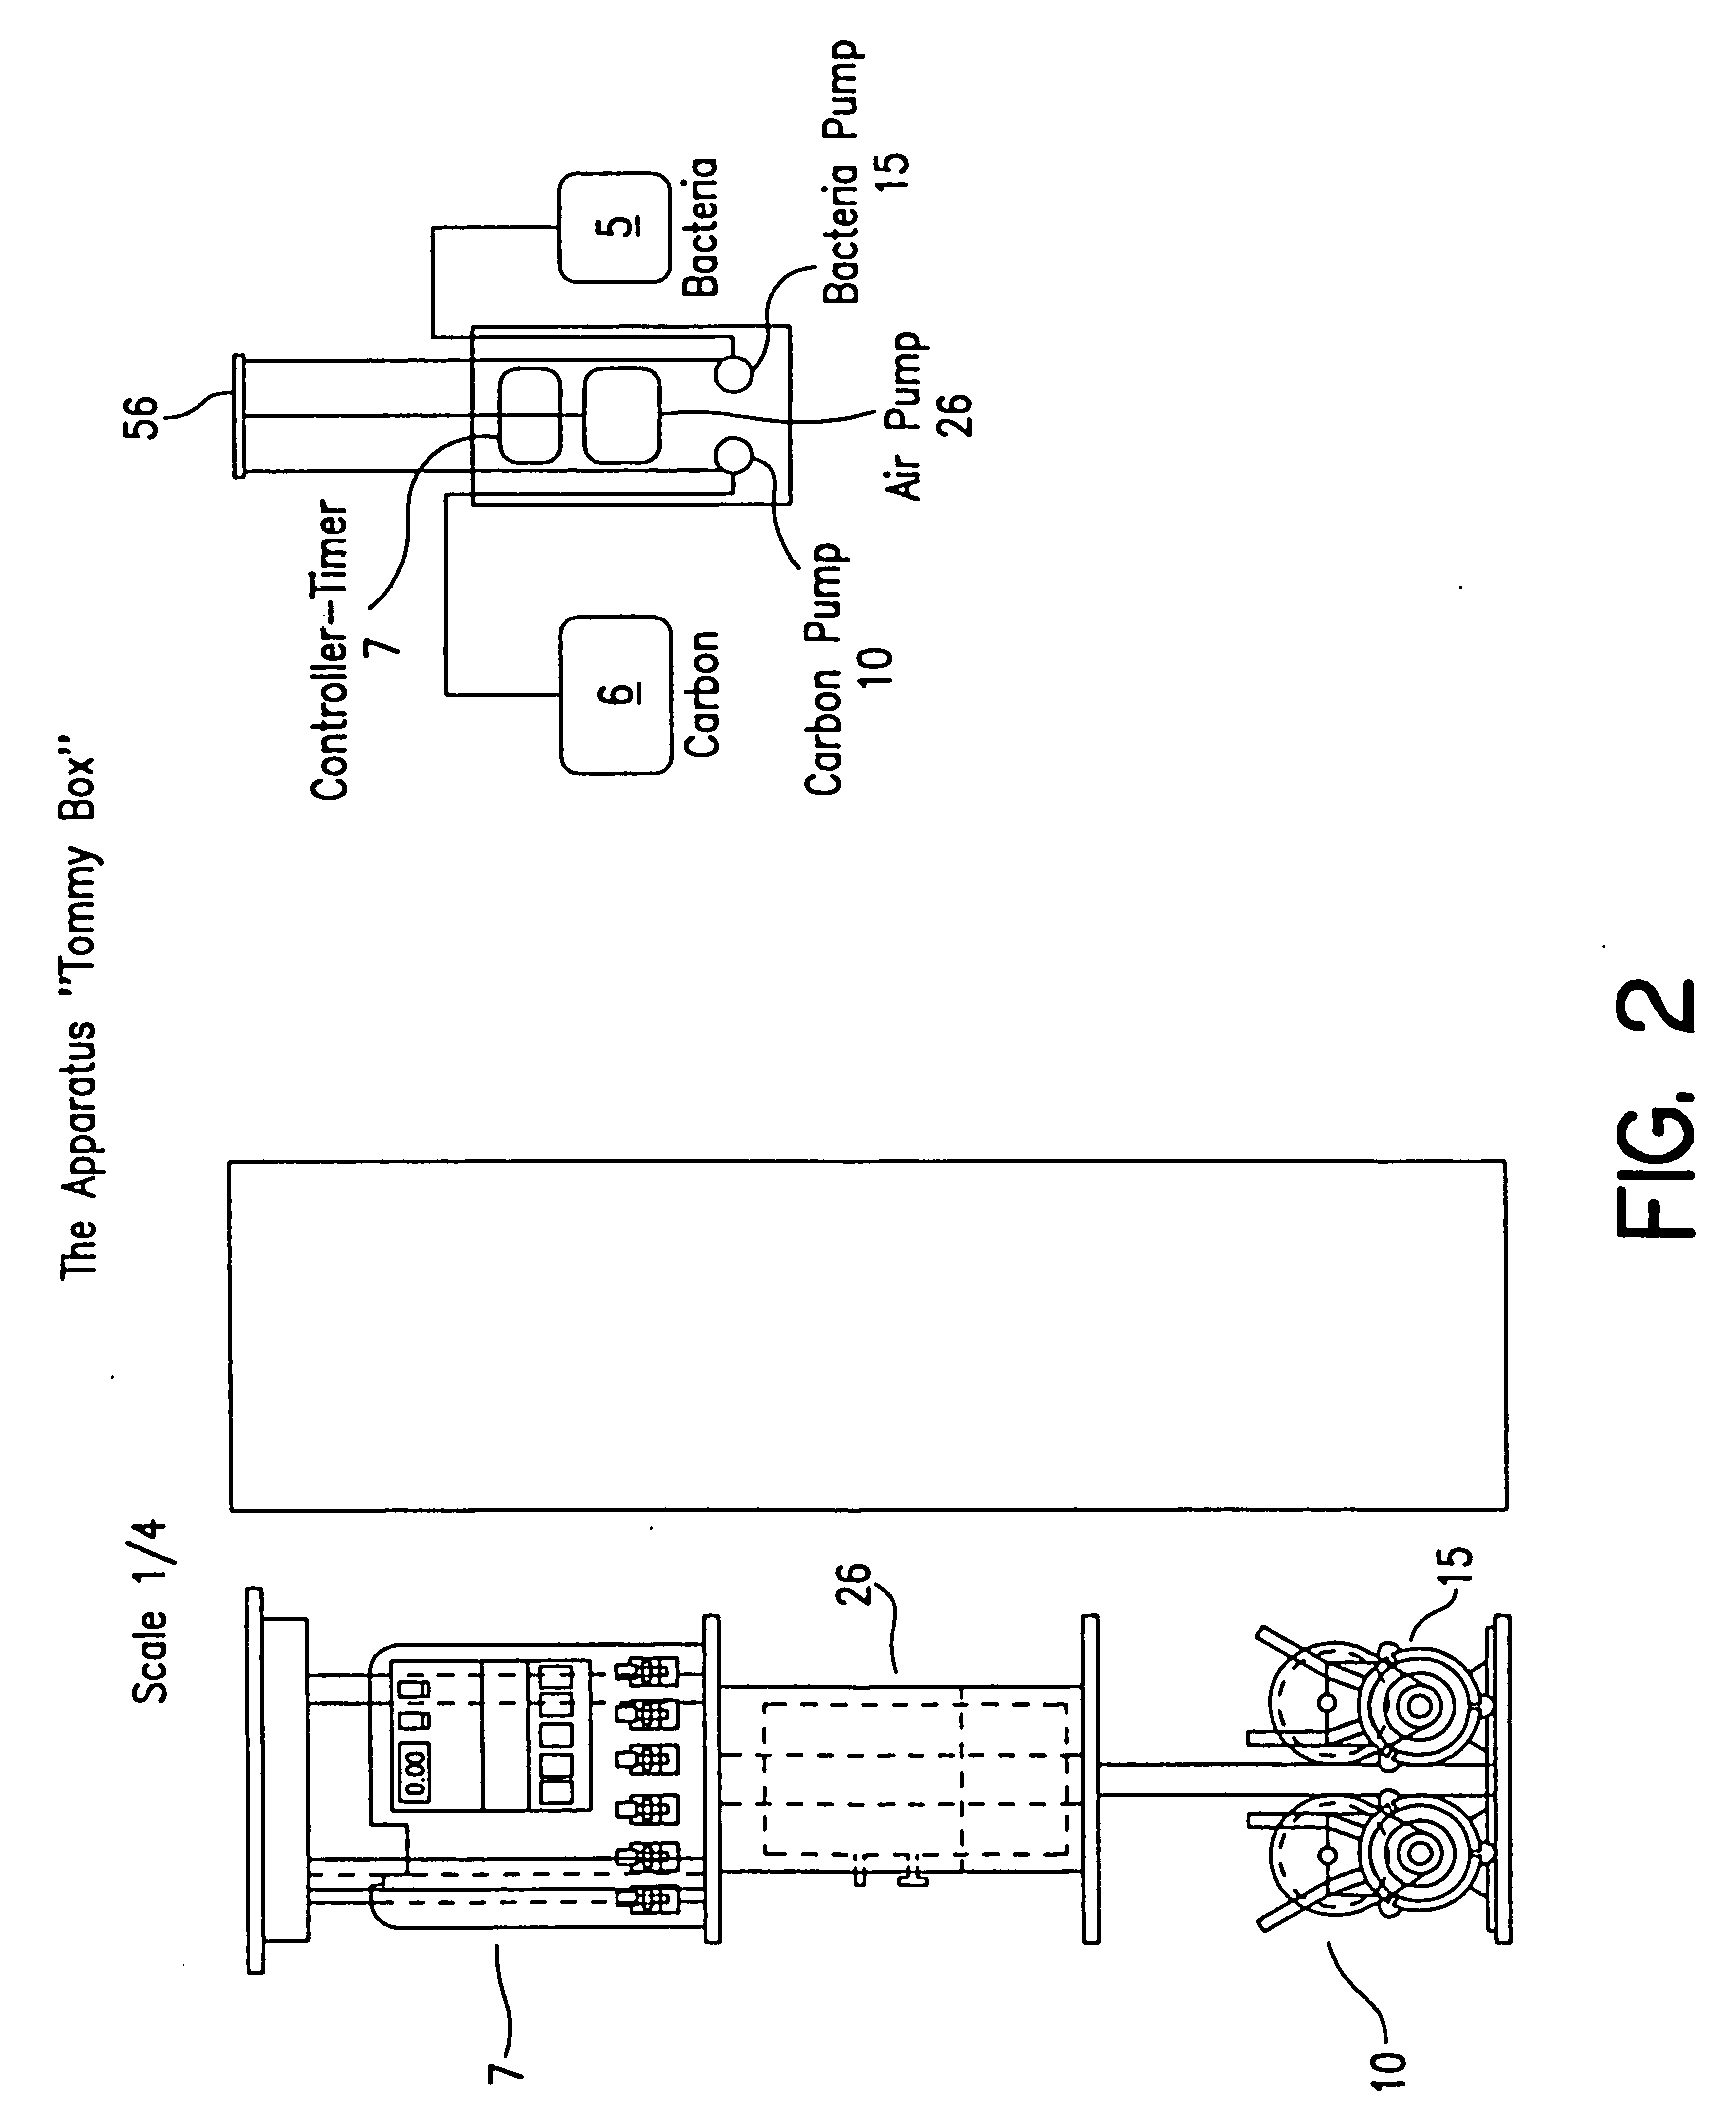 Process and apparatus for waste water treatment